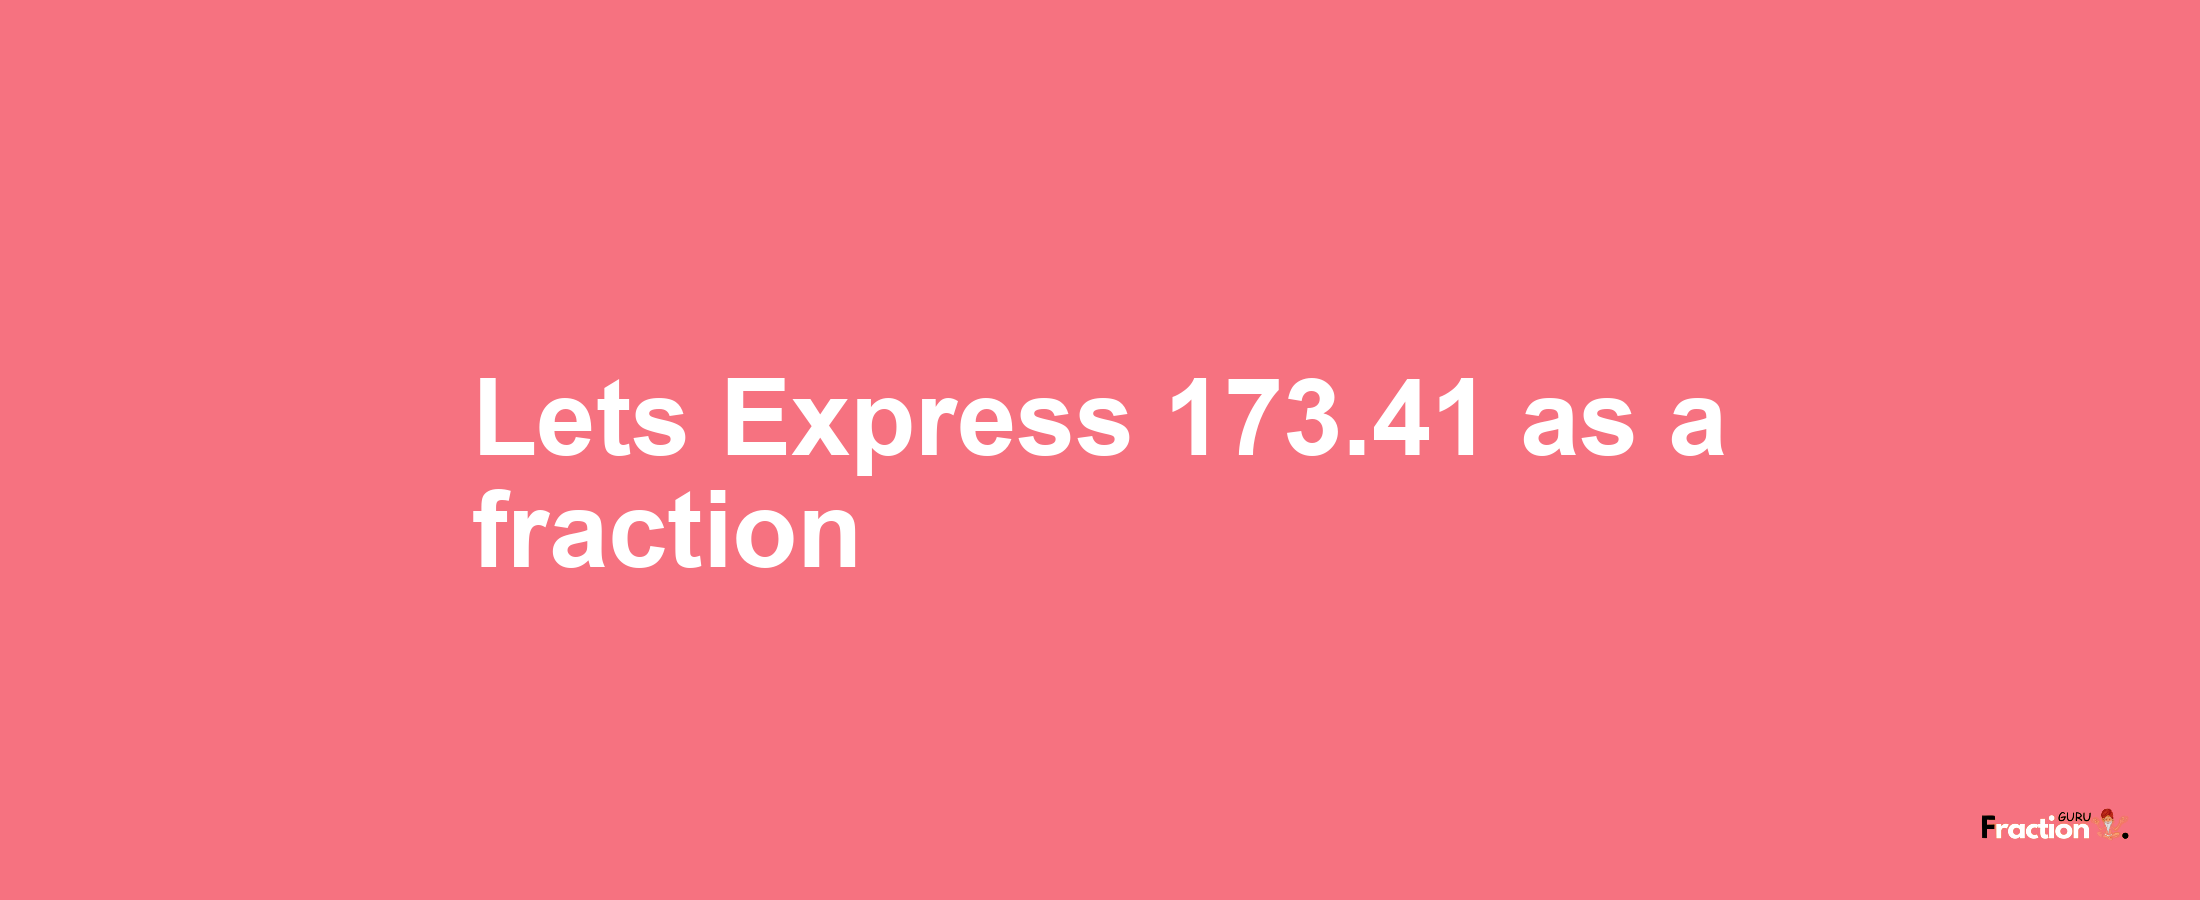 Lets Express 173.41 as afraction